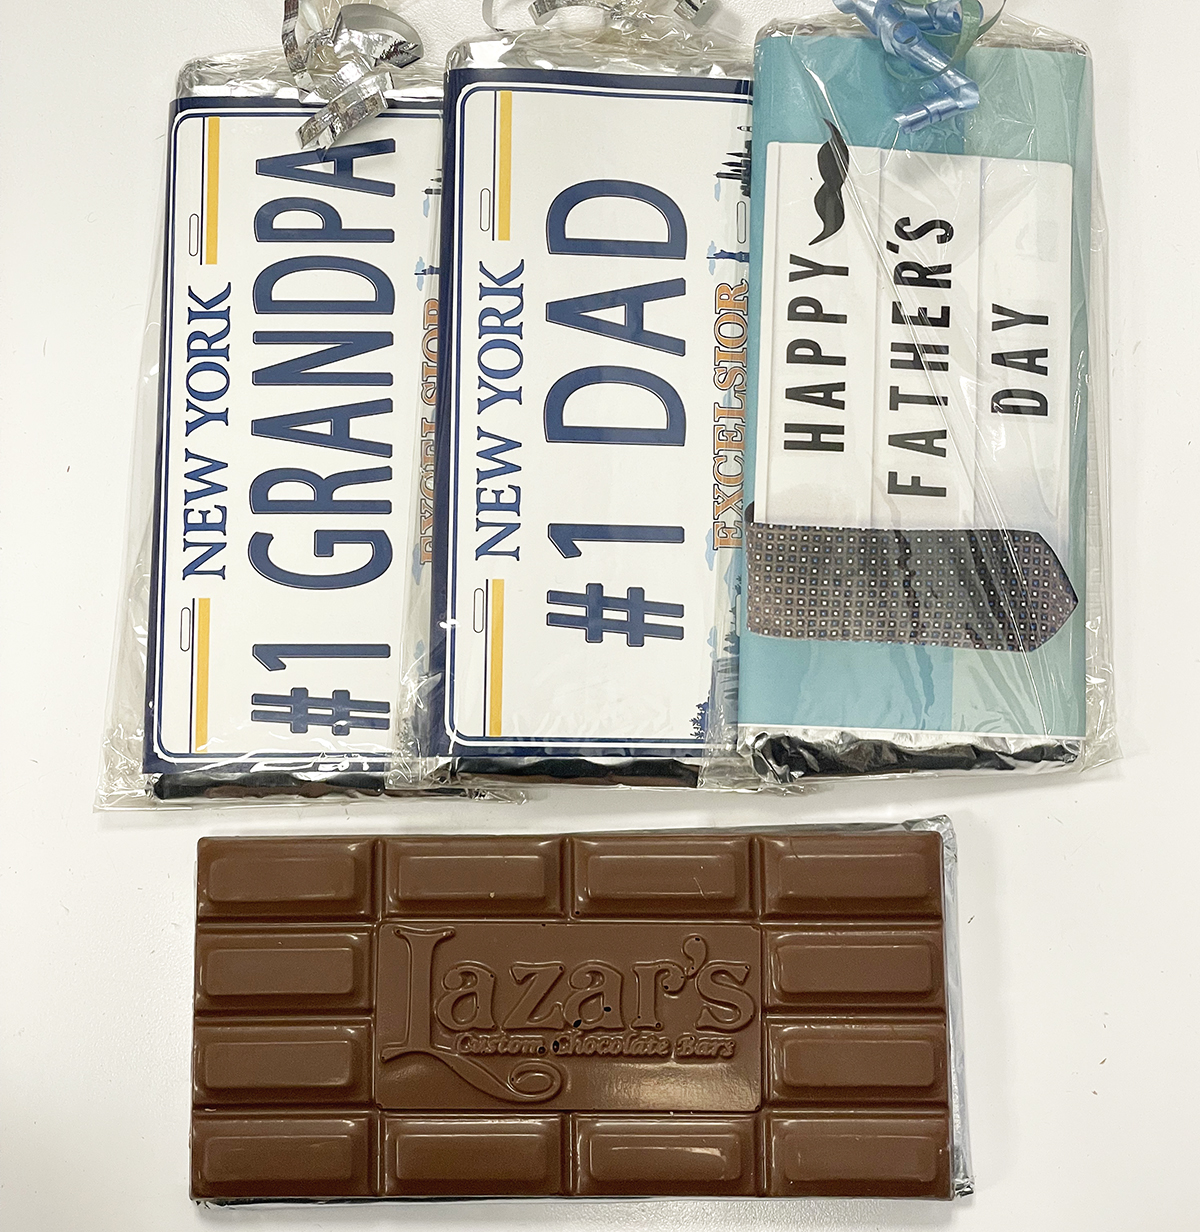 Stock Chocolate Bars - Father's Day